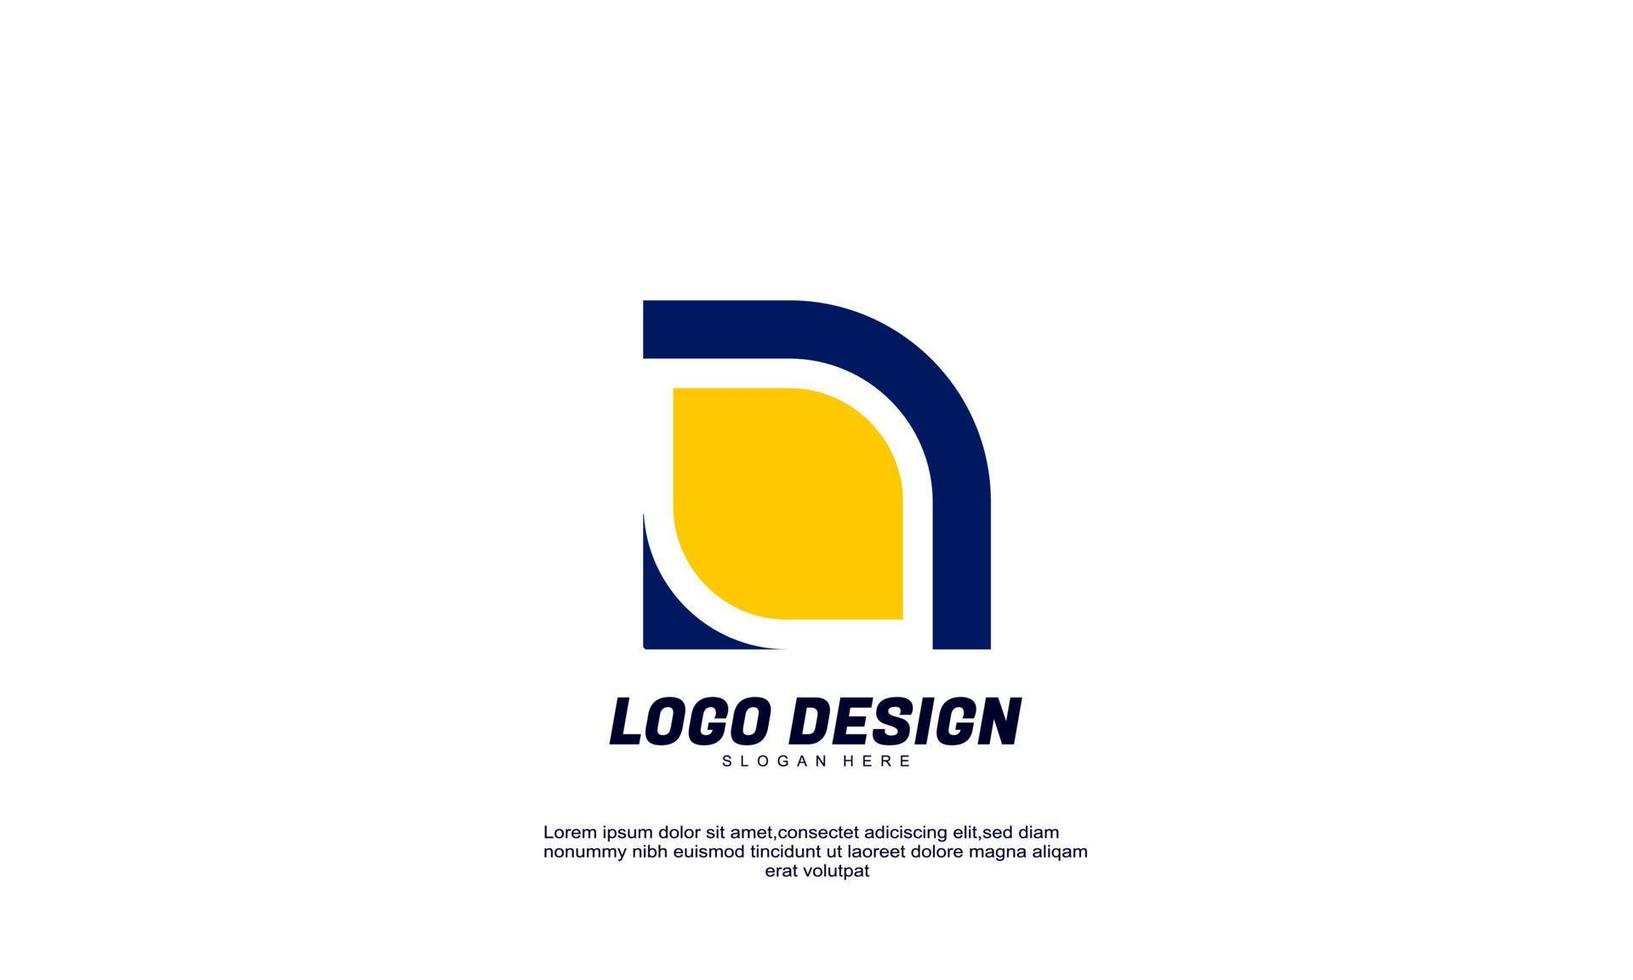 awesome shape idea brand idenity logo modern for business and company collections design template vector